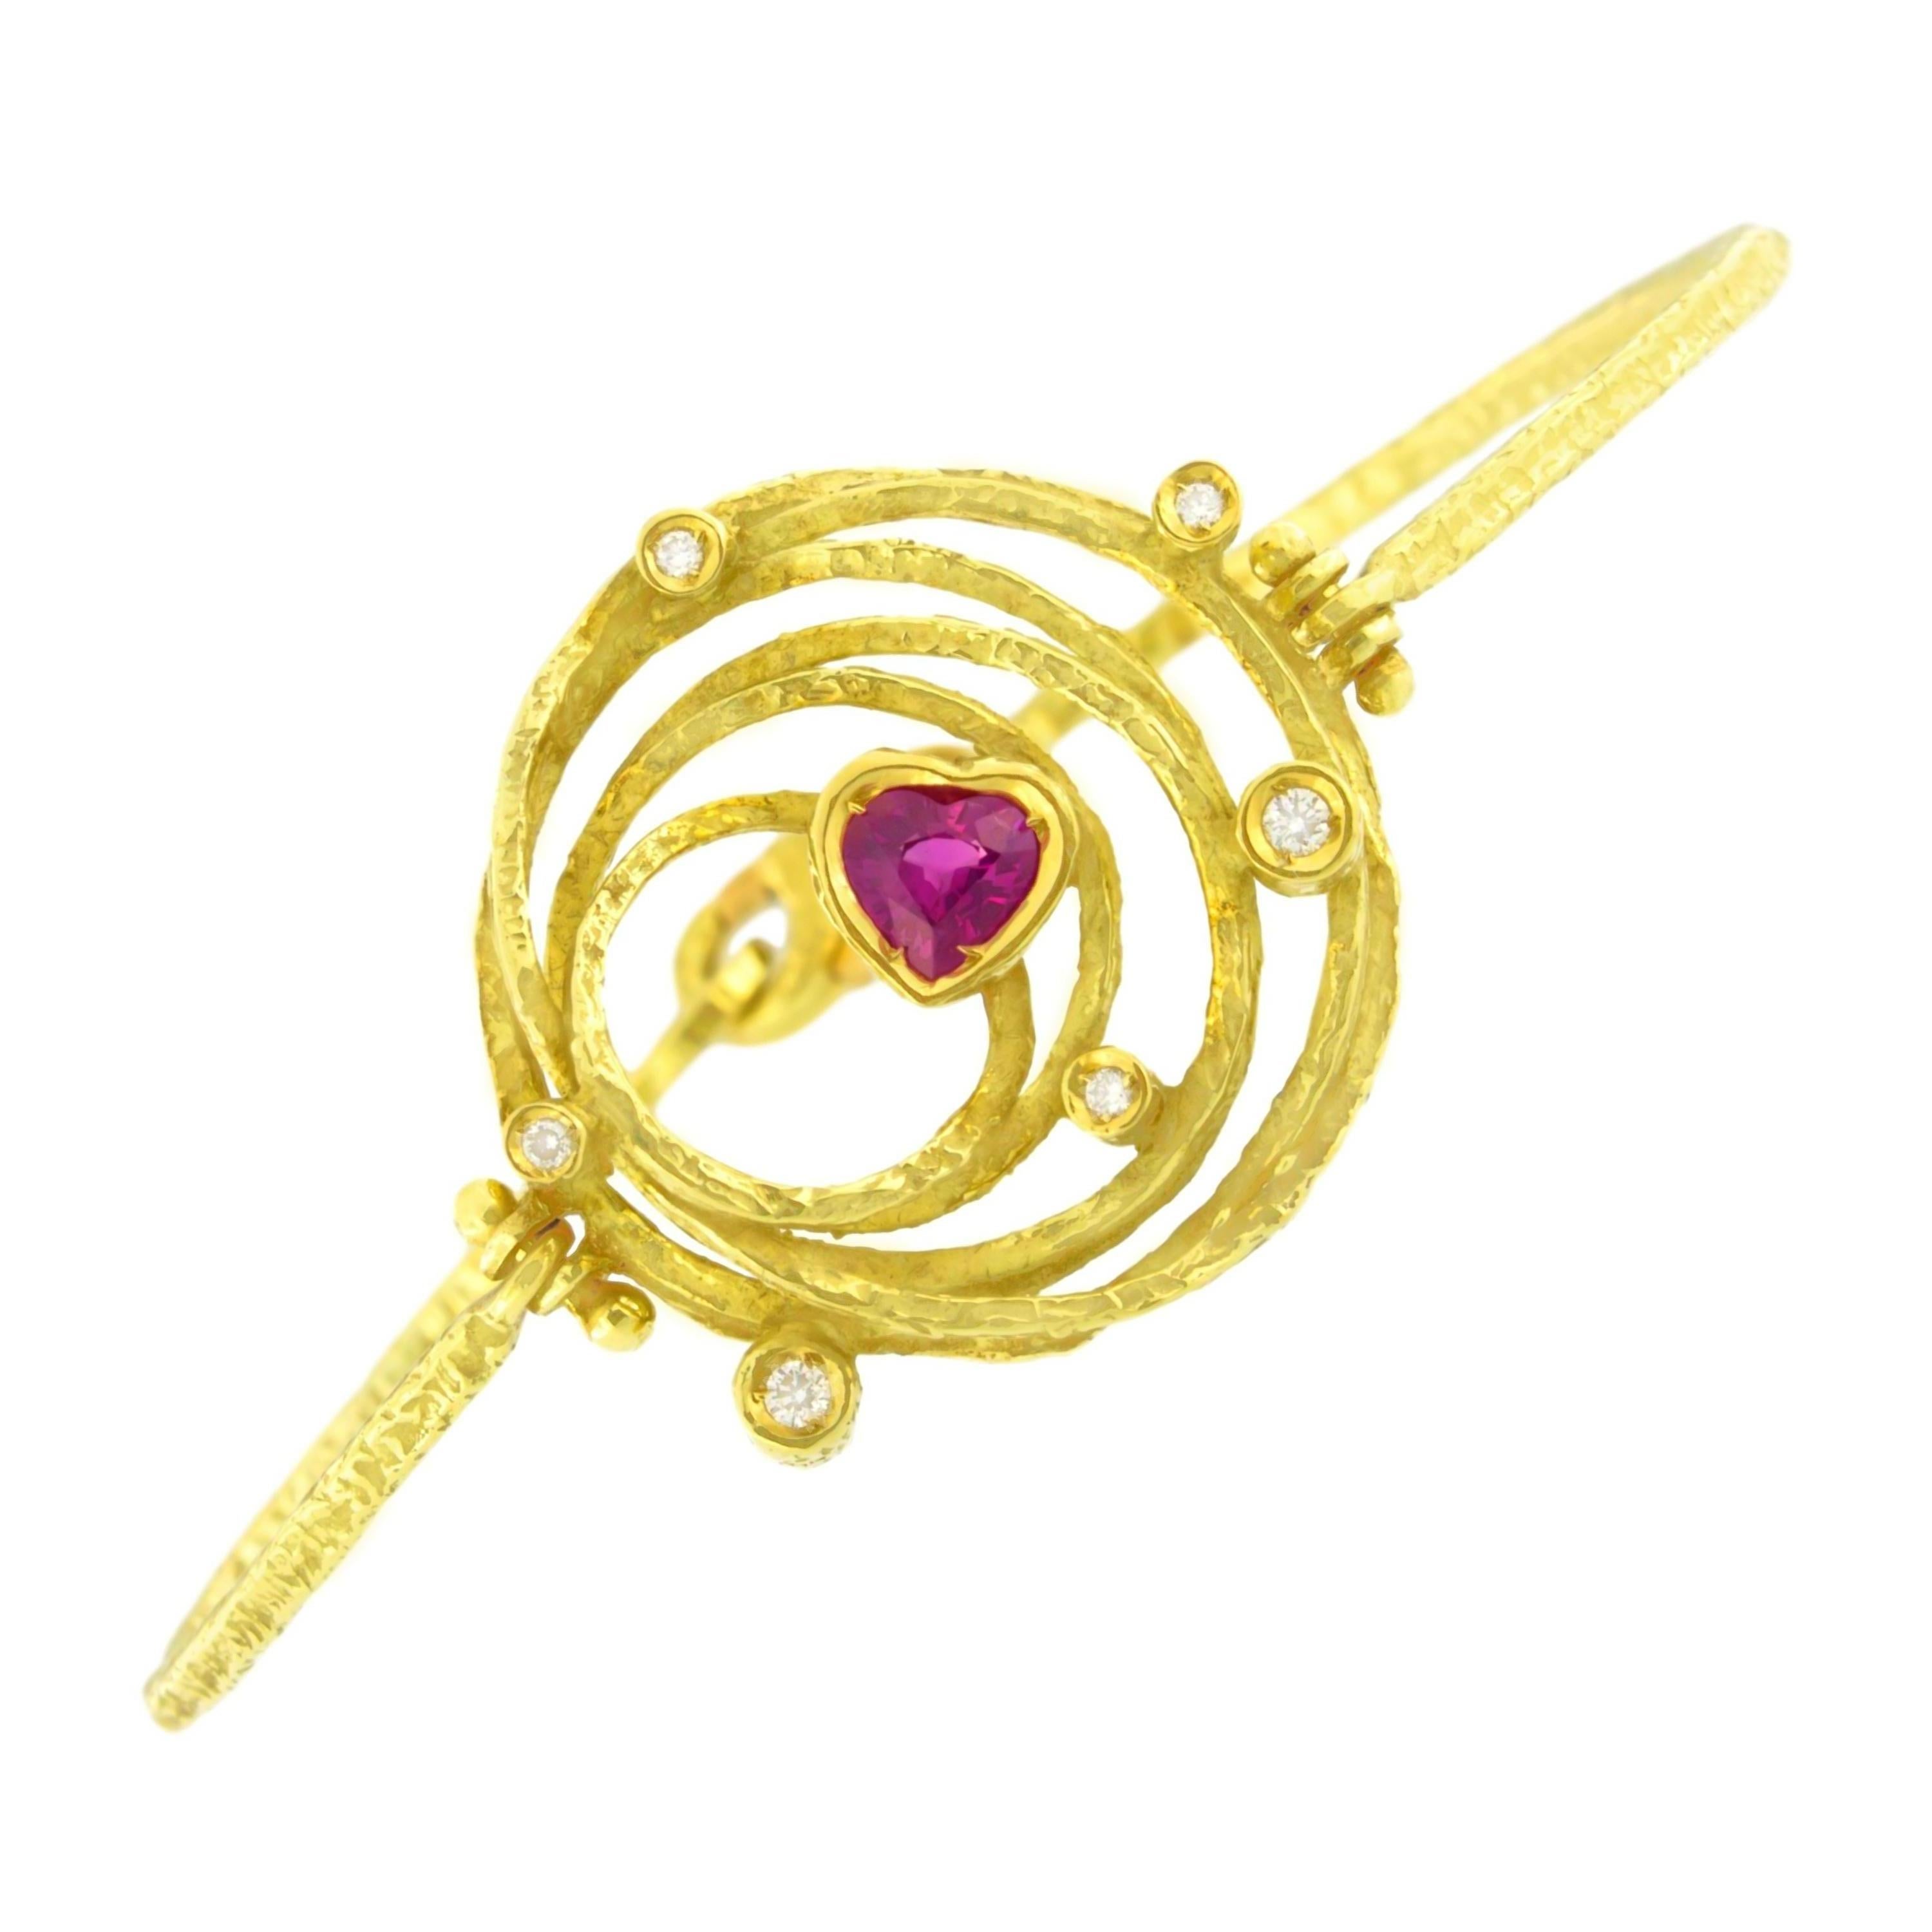 Exquisite Heart Ruby and Diamonds Satin Yellow Gold Modern Bracelet, from Sacchi’s 